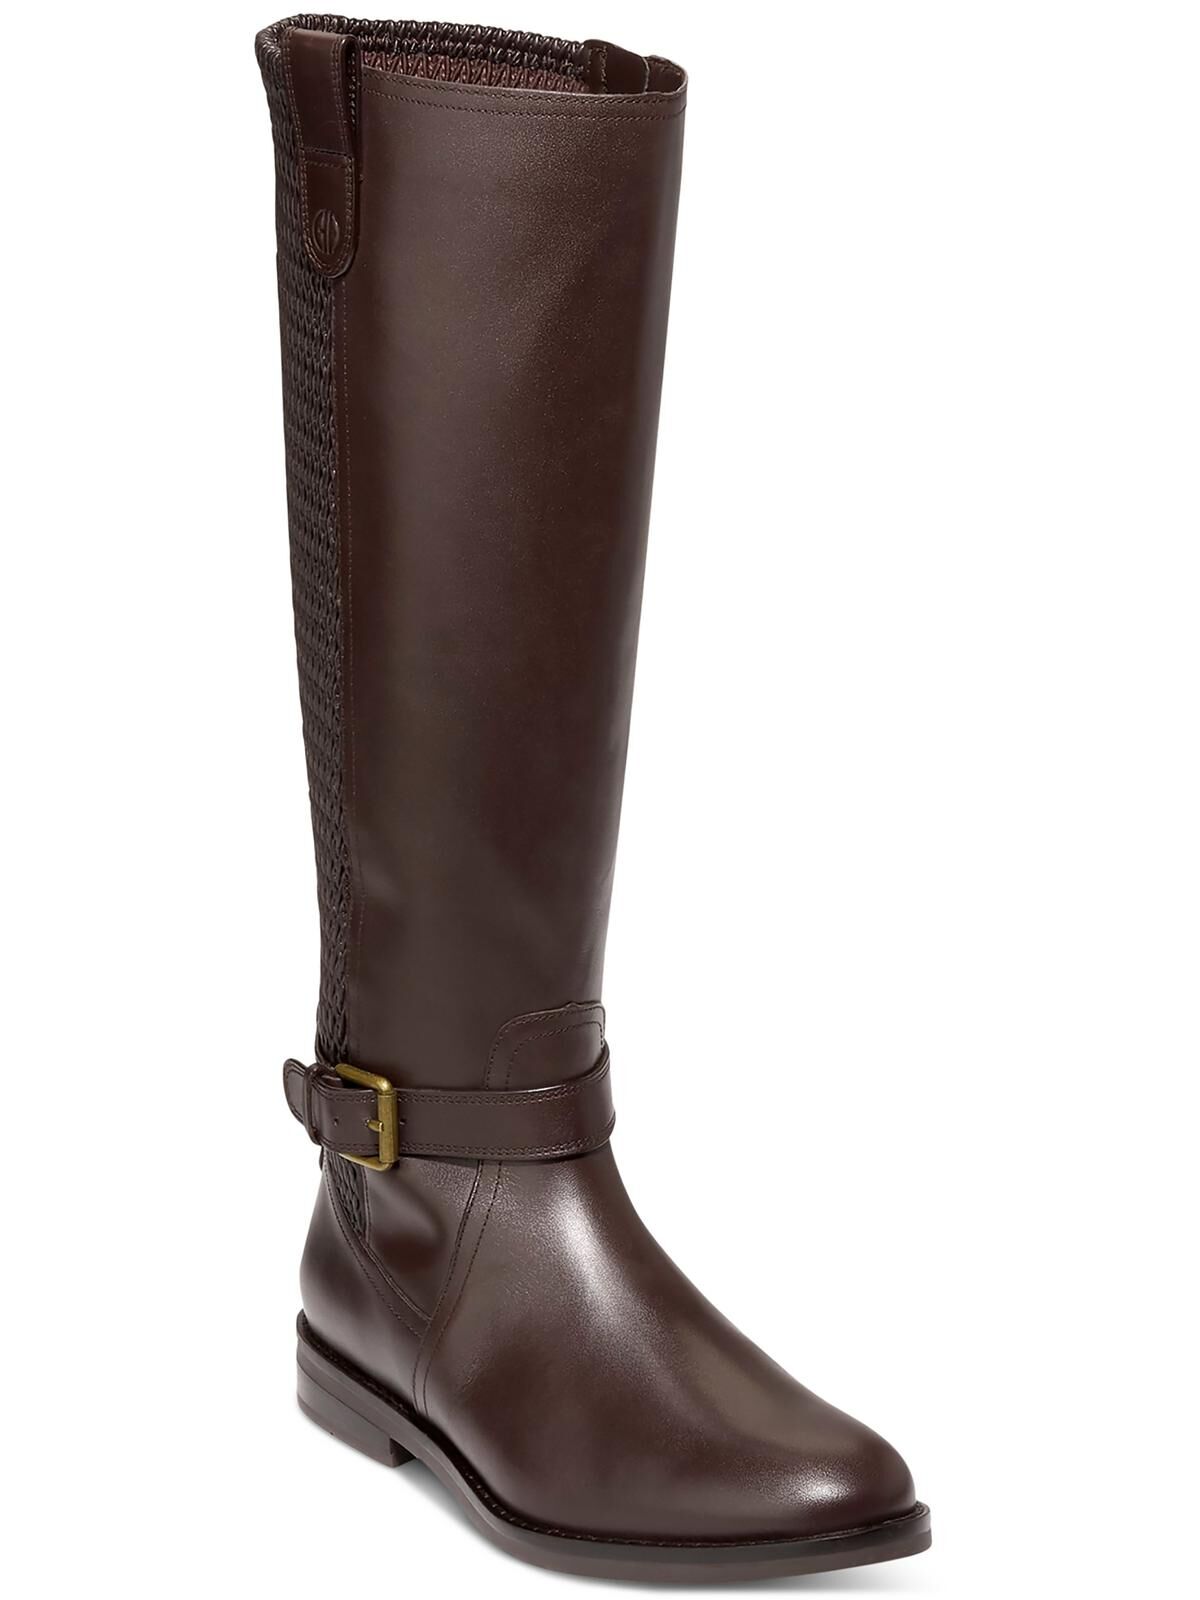 Cole Haan Cape Stretch Boot Womens Leather Stretch Knee-High Boots US 6.5 female